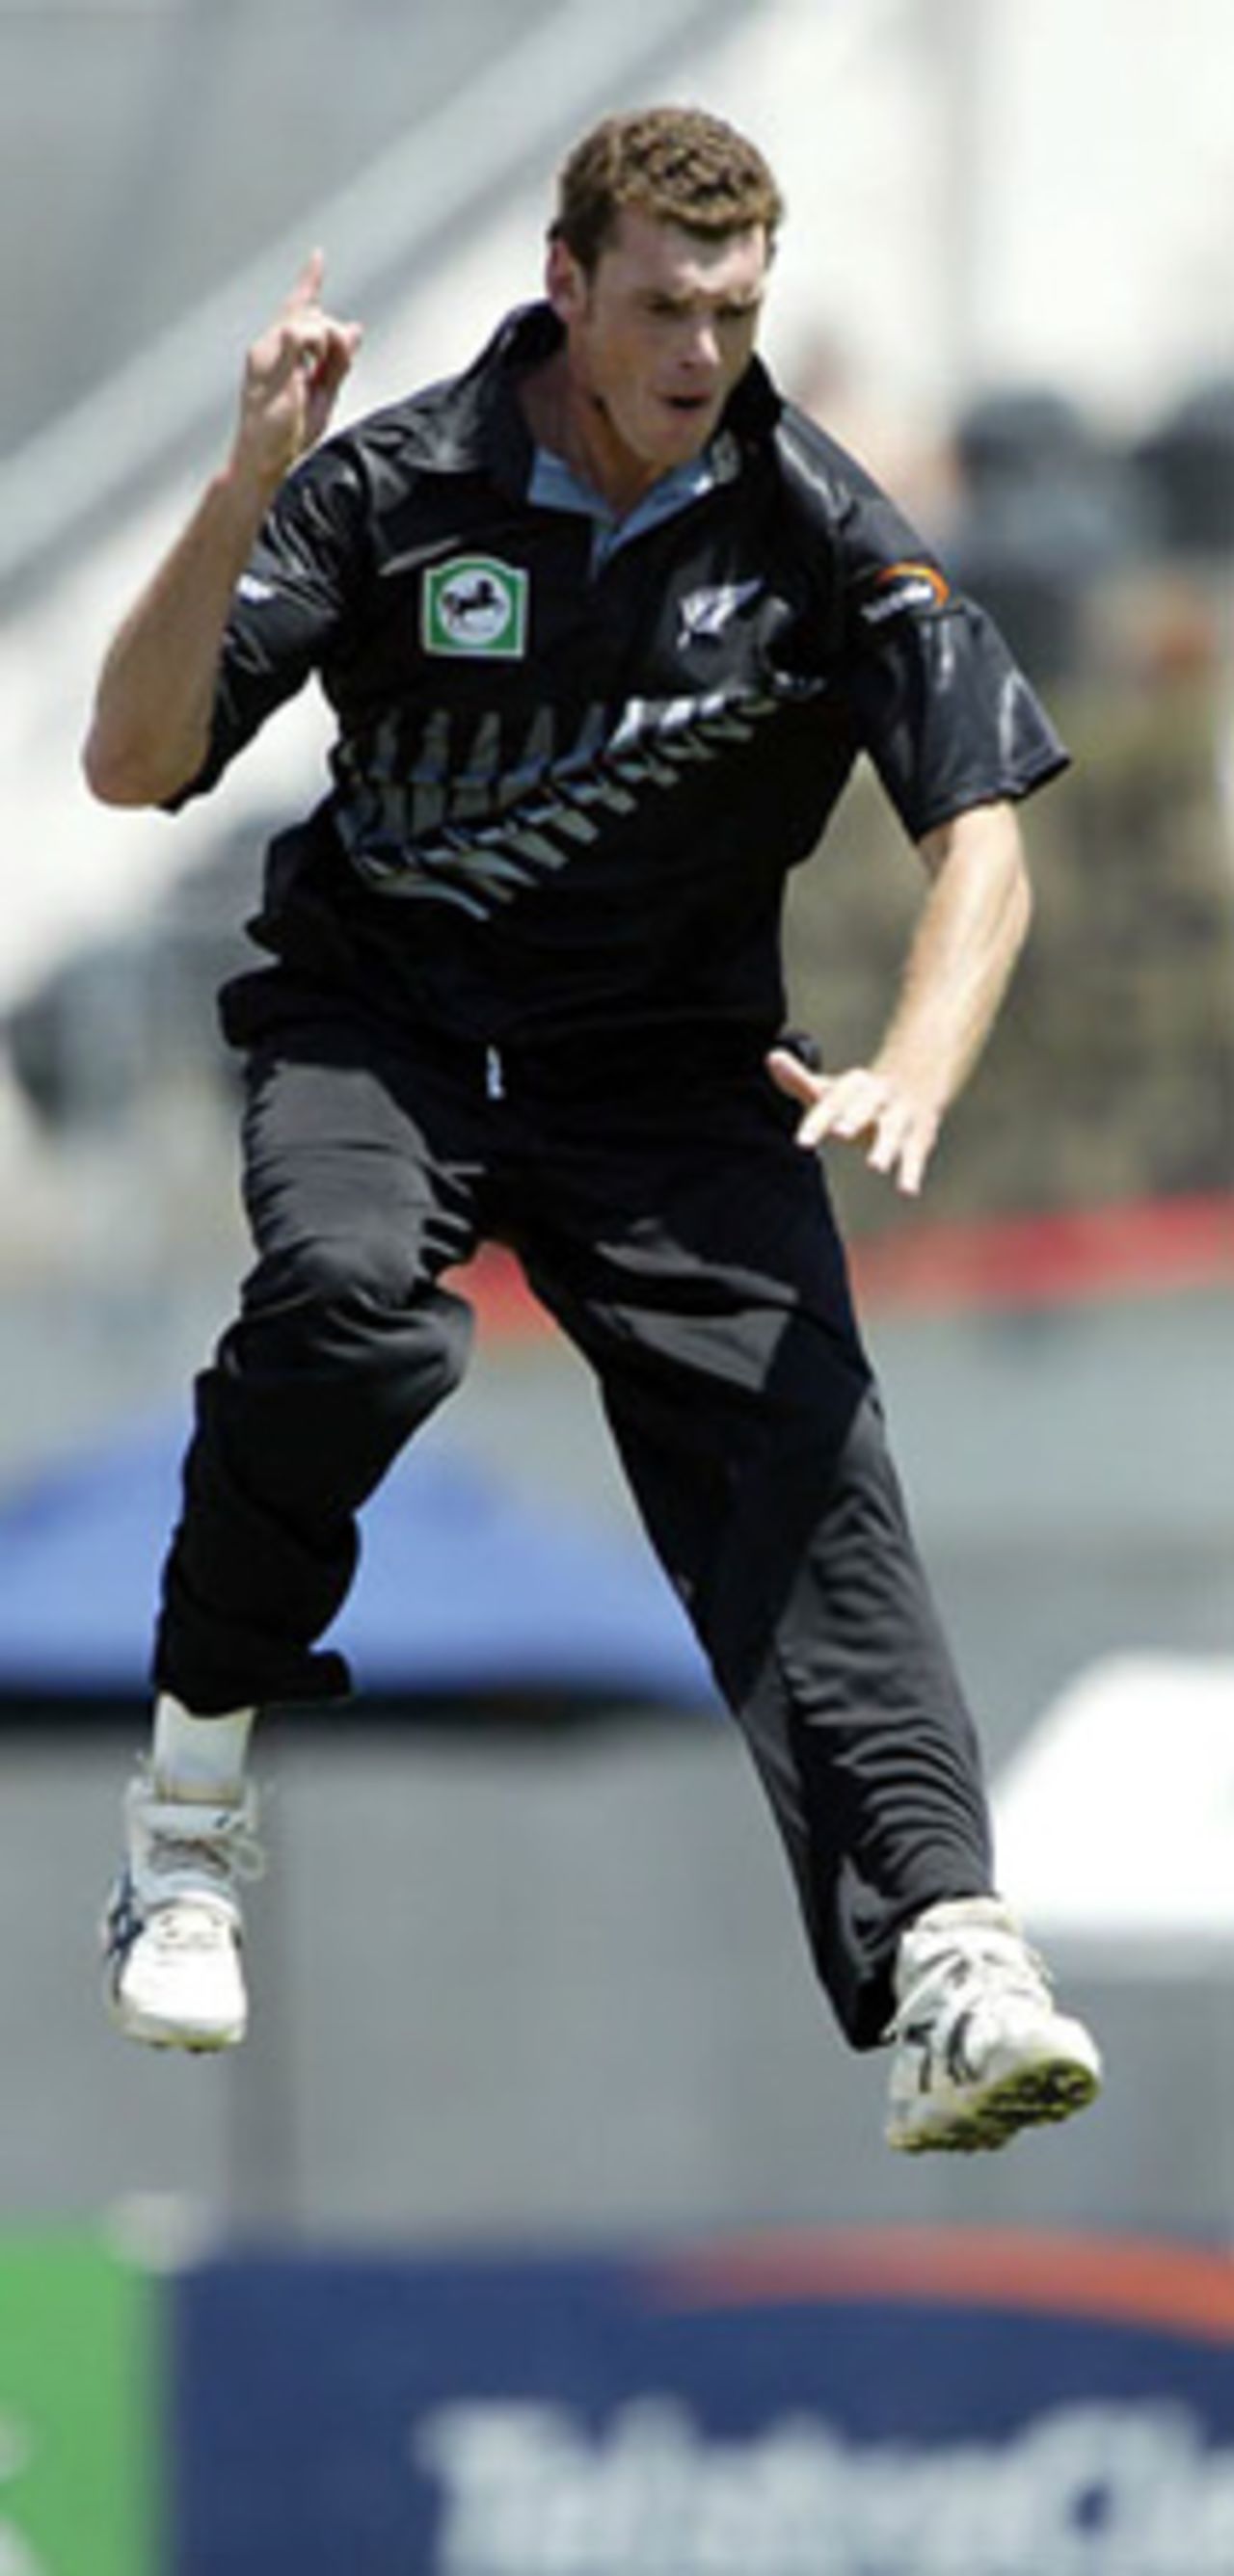 New Zealand bowler Kyle Mills jumps to celebrate the dismissal of India batsman Virender Sehwag, caught by wicket-keeper Brendon McCullum for seven. 3rd ODI: New Zealand v India at Jade Stadium, Christchurch, 1 January 2003.